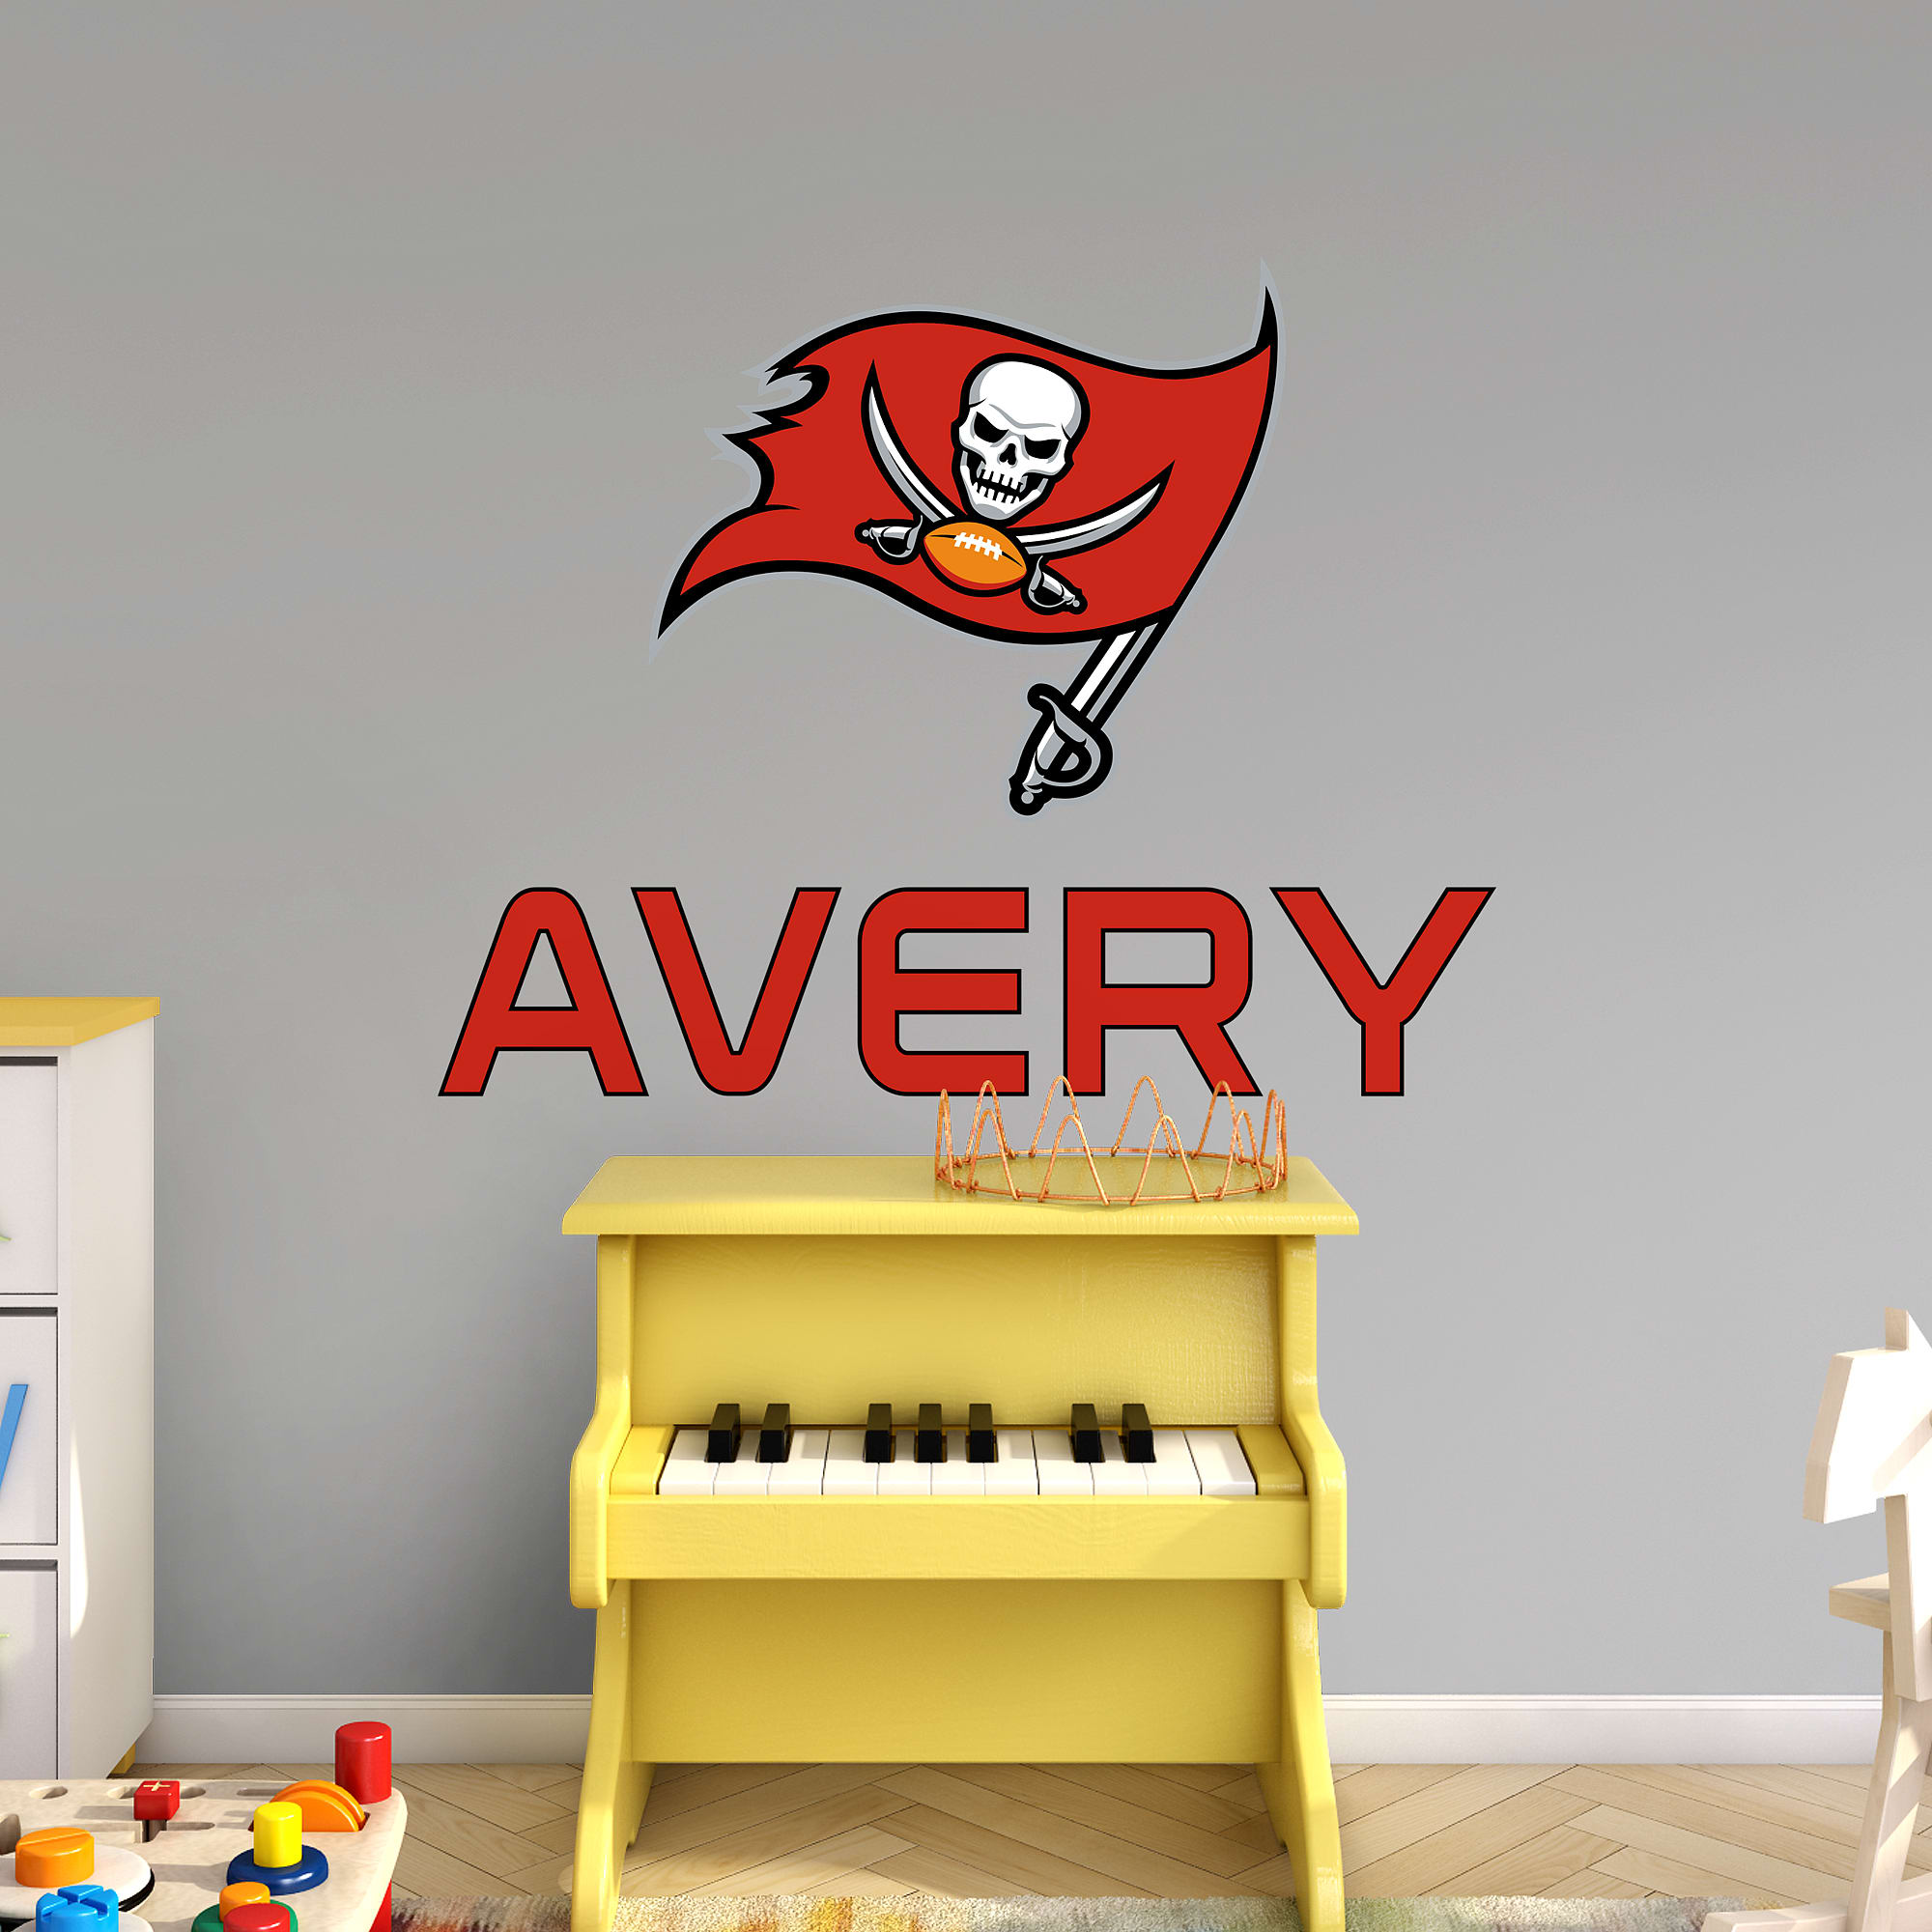 Tampa Bay Buccaneers: Stacked Personalized Name - Officially Licensed NFL Transfer Decal in Red (52"W x 39.5"H) by Fathead | Vin